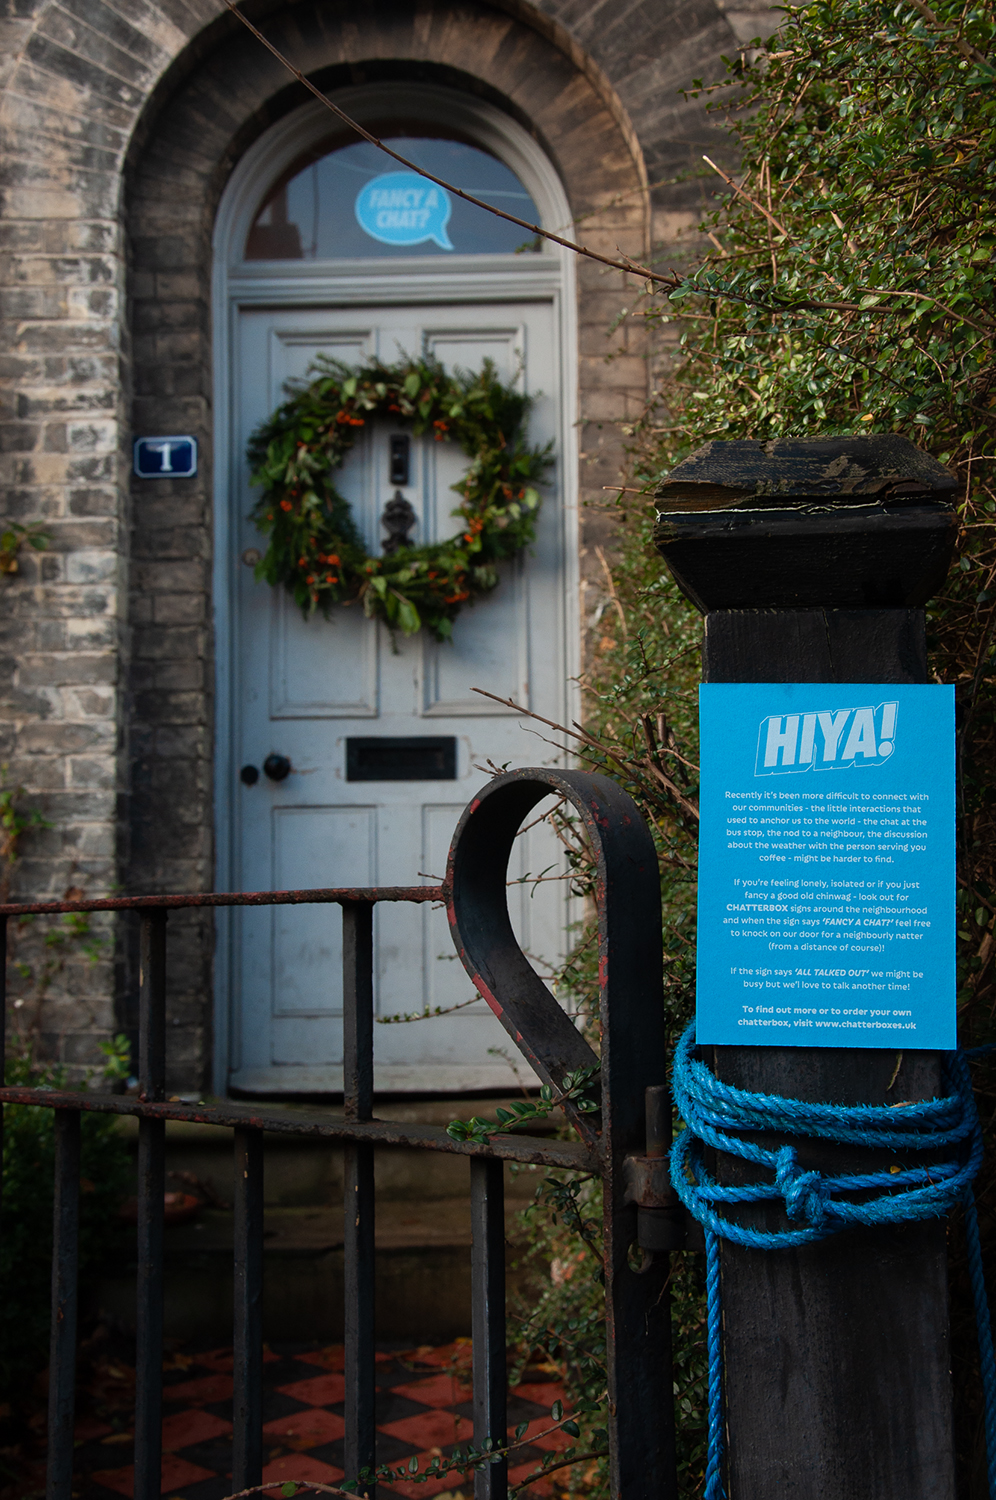 A bright blue sign with the heading HIYA is attached to a gatepost. There is further text explaining the Chatterbox project. In the background, a blue speech bubble shaped sign can be seen hanging in the transom window above the front door.